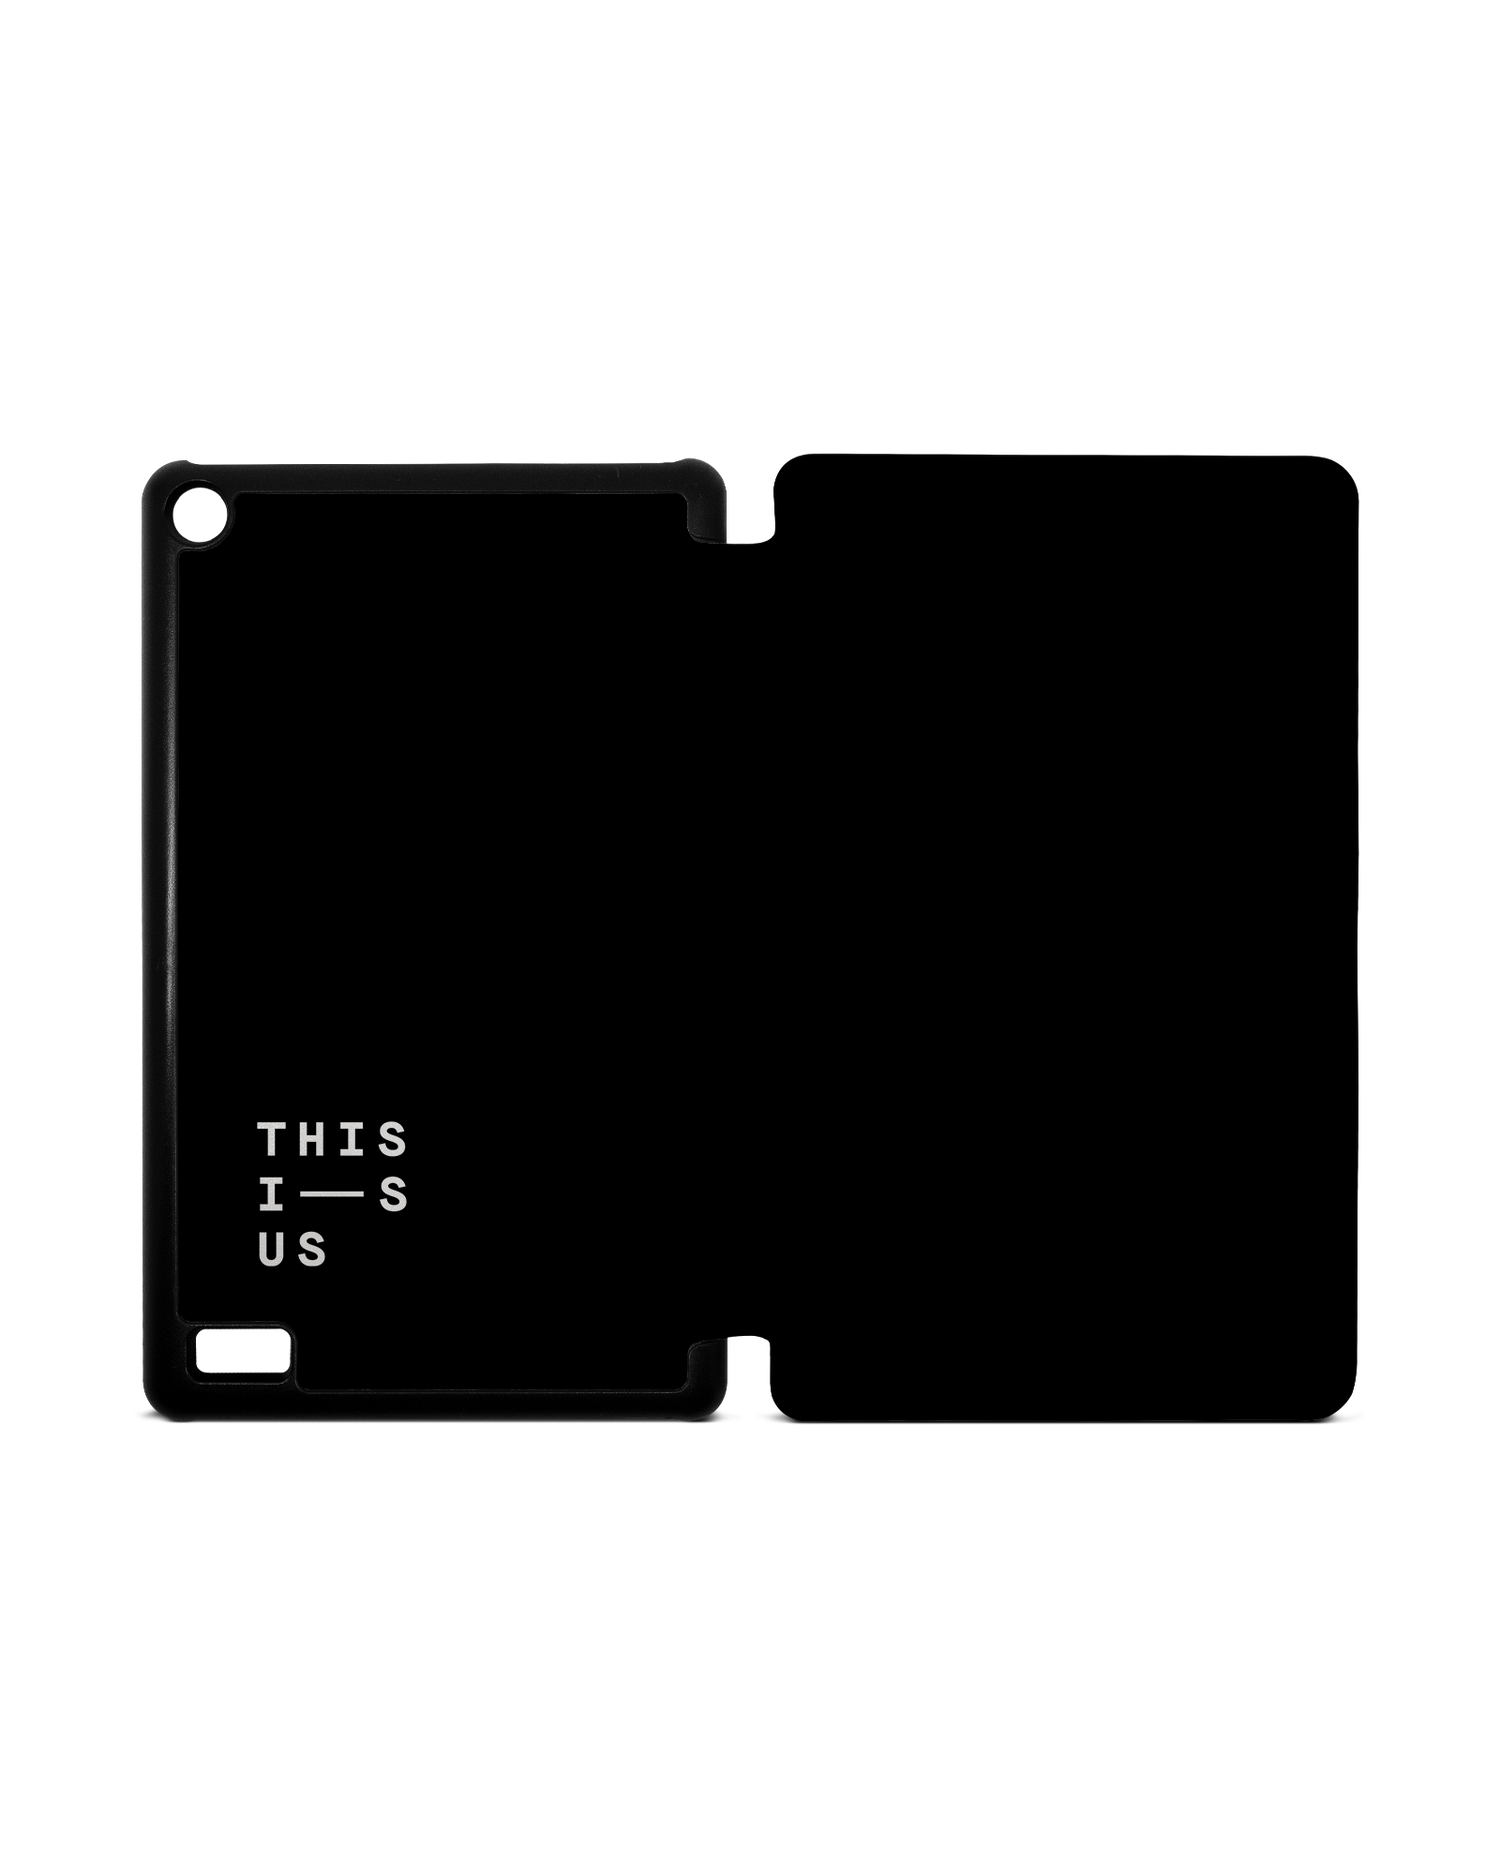 This Is Us Tablet Smart Case for Amazon Fire 7: Opened